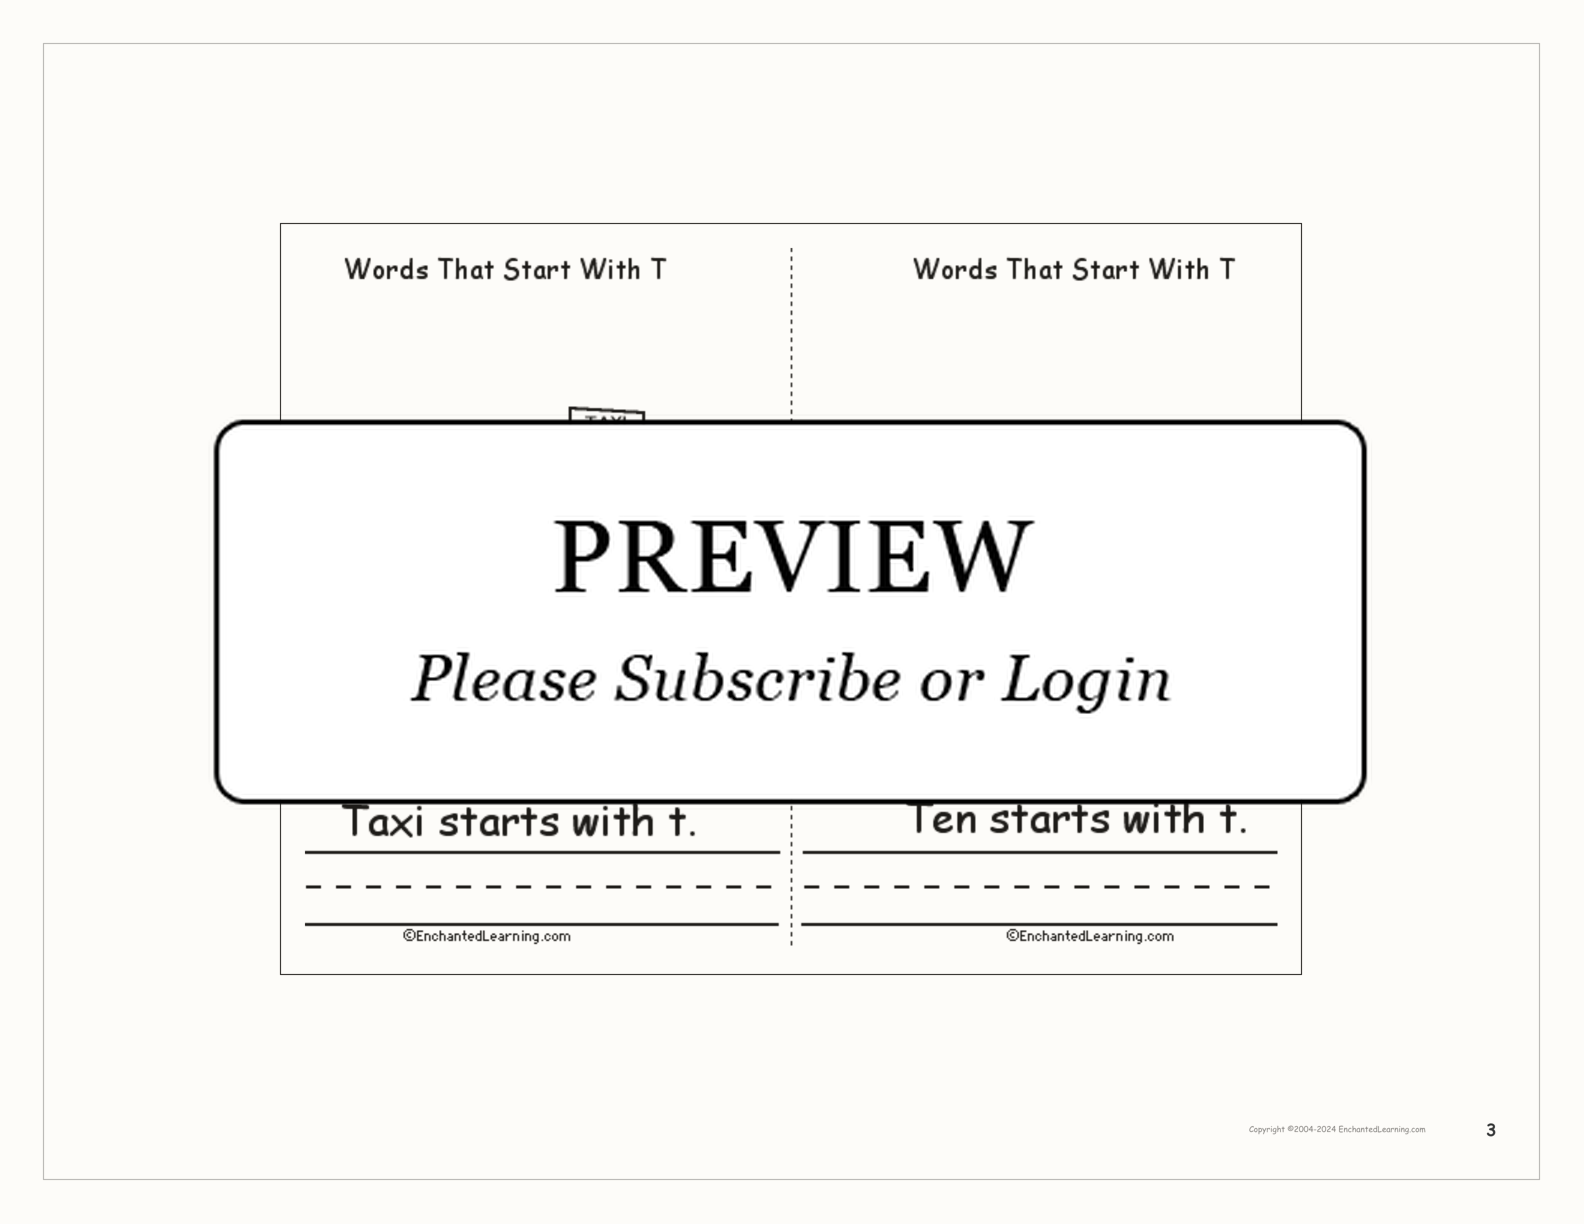 Words That Start With T interactive printout page 3